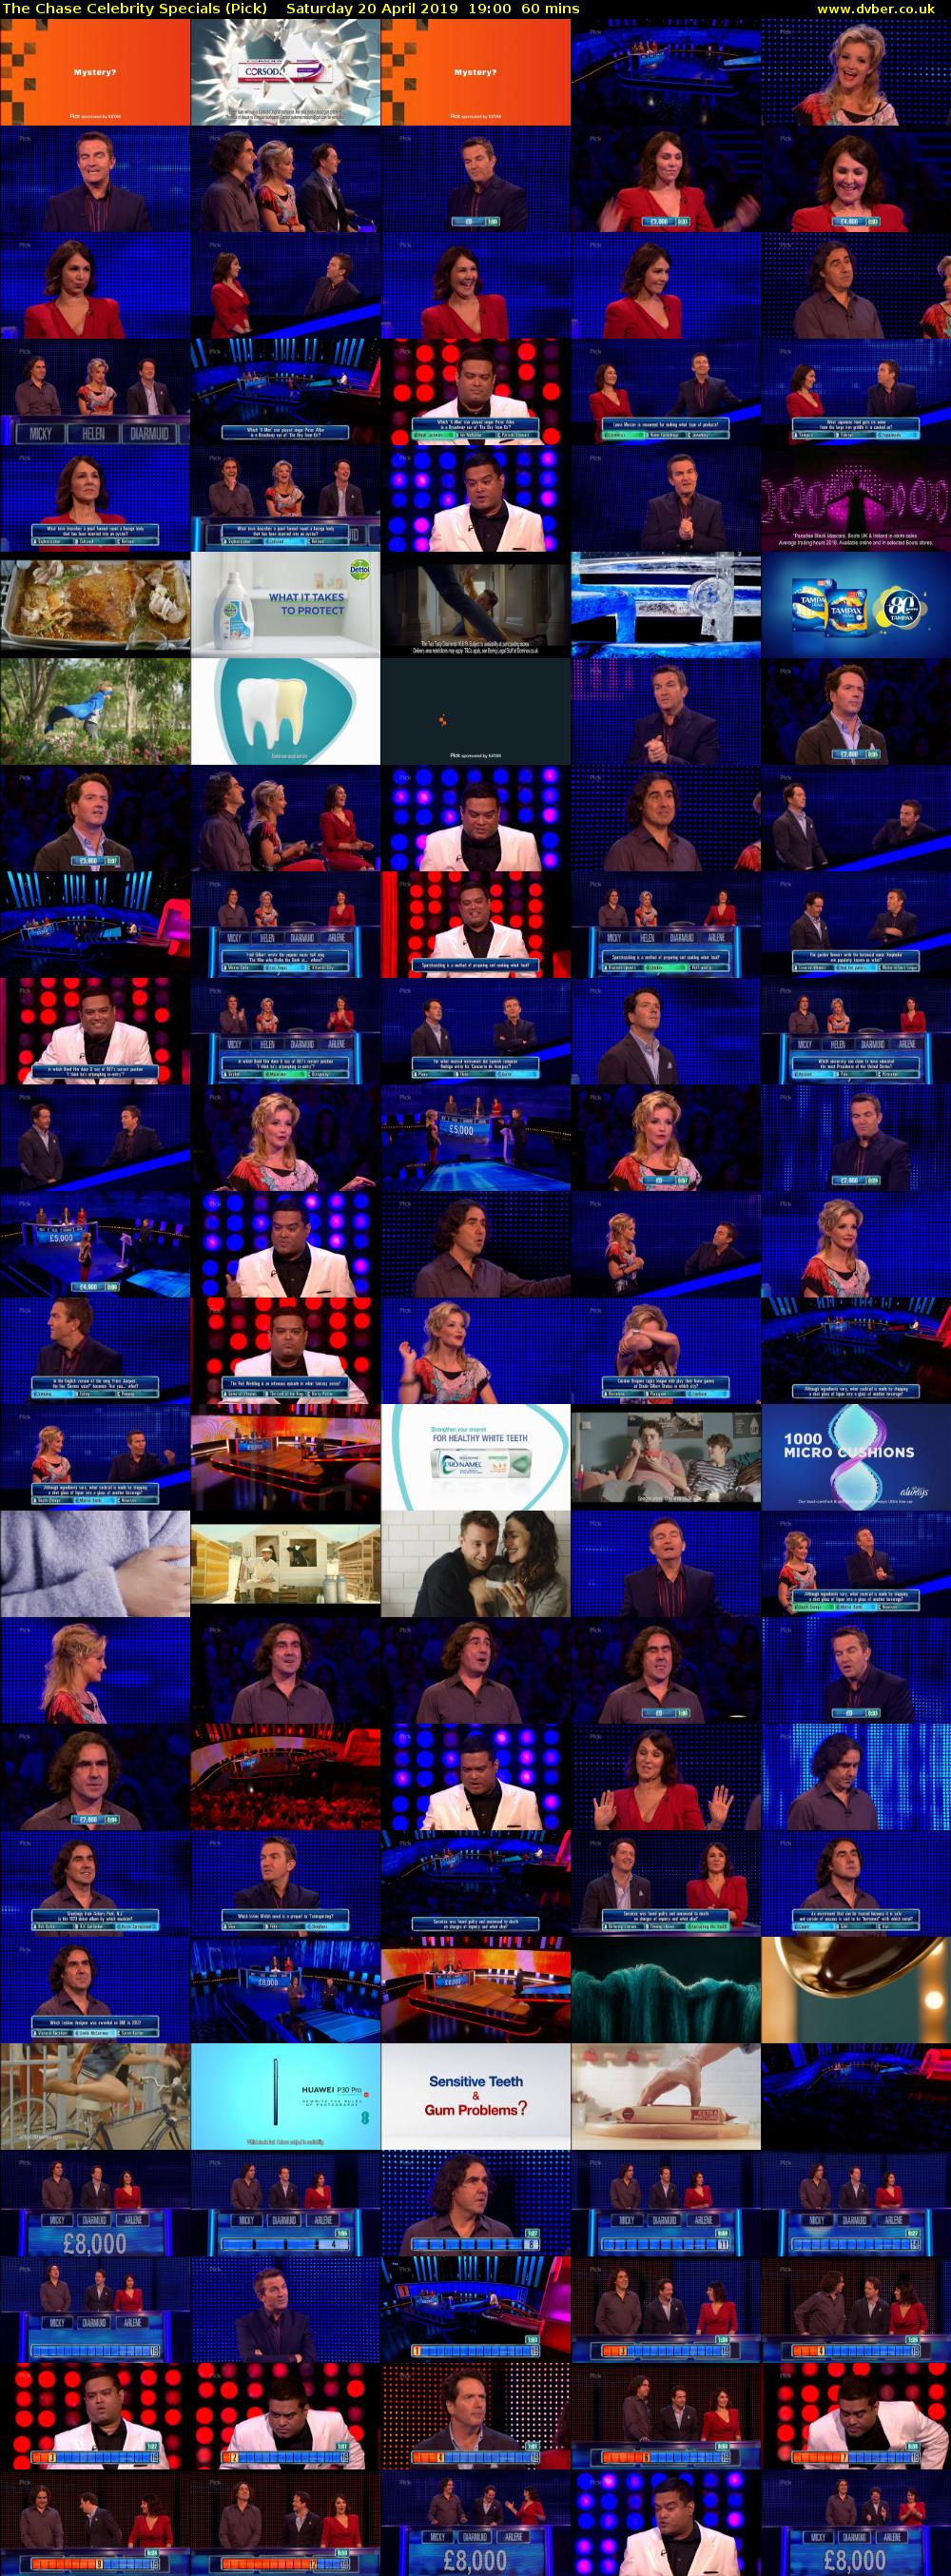 The Chase Celebrity Specials (Pick) Saturday 20 April 2019 19:00 - 20:00